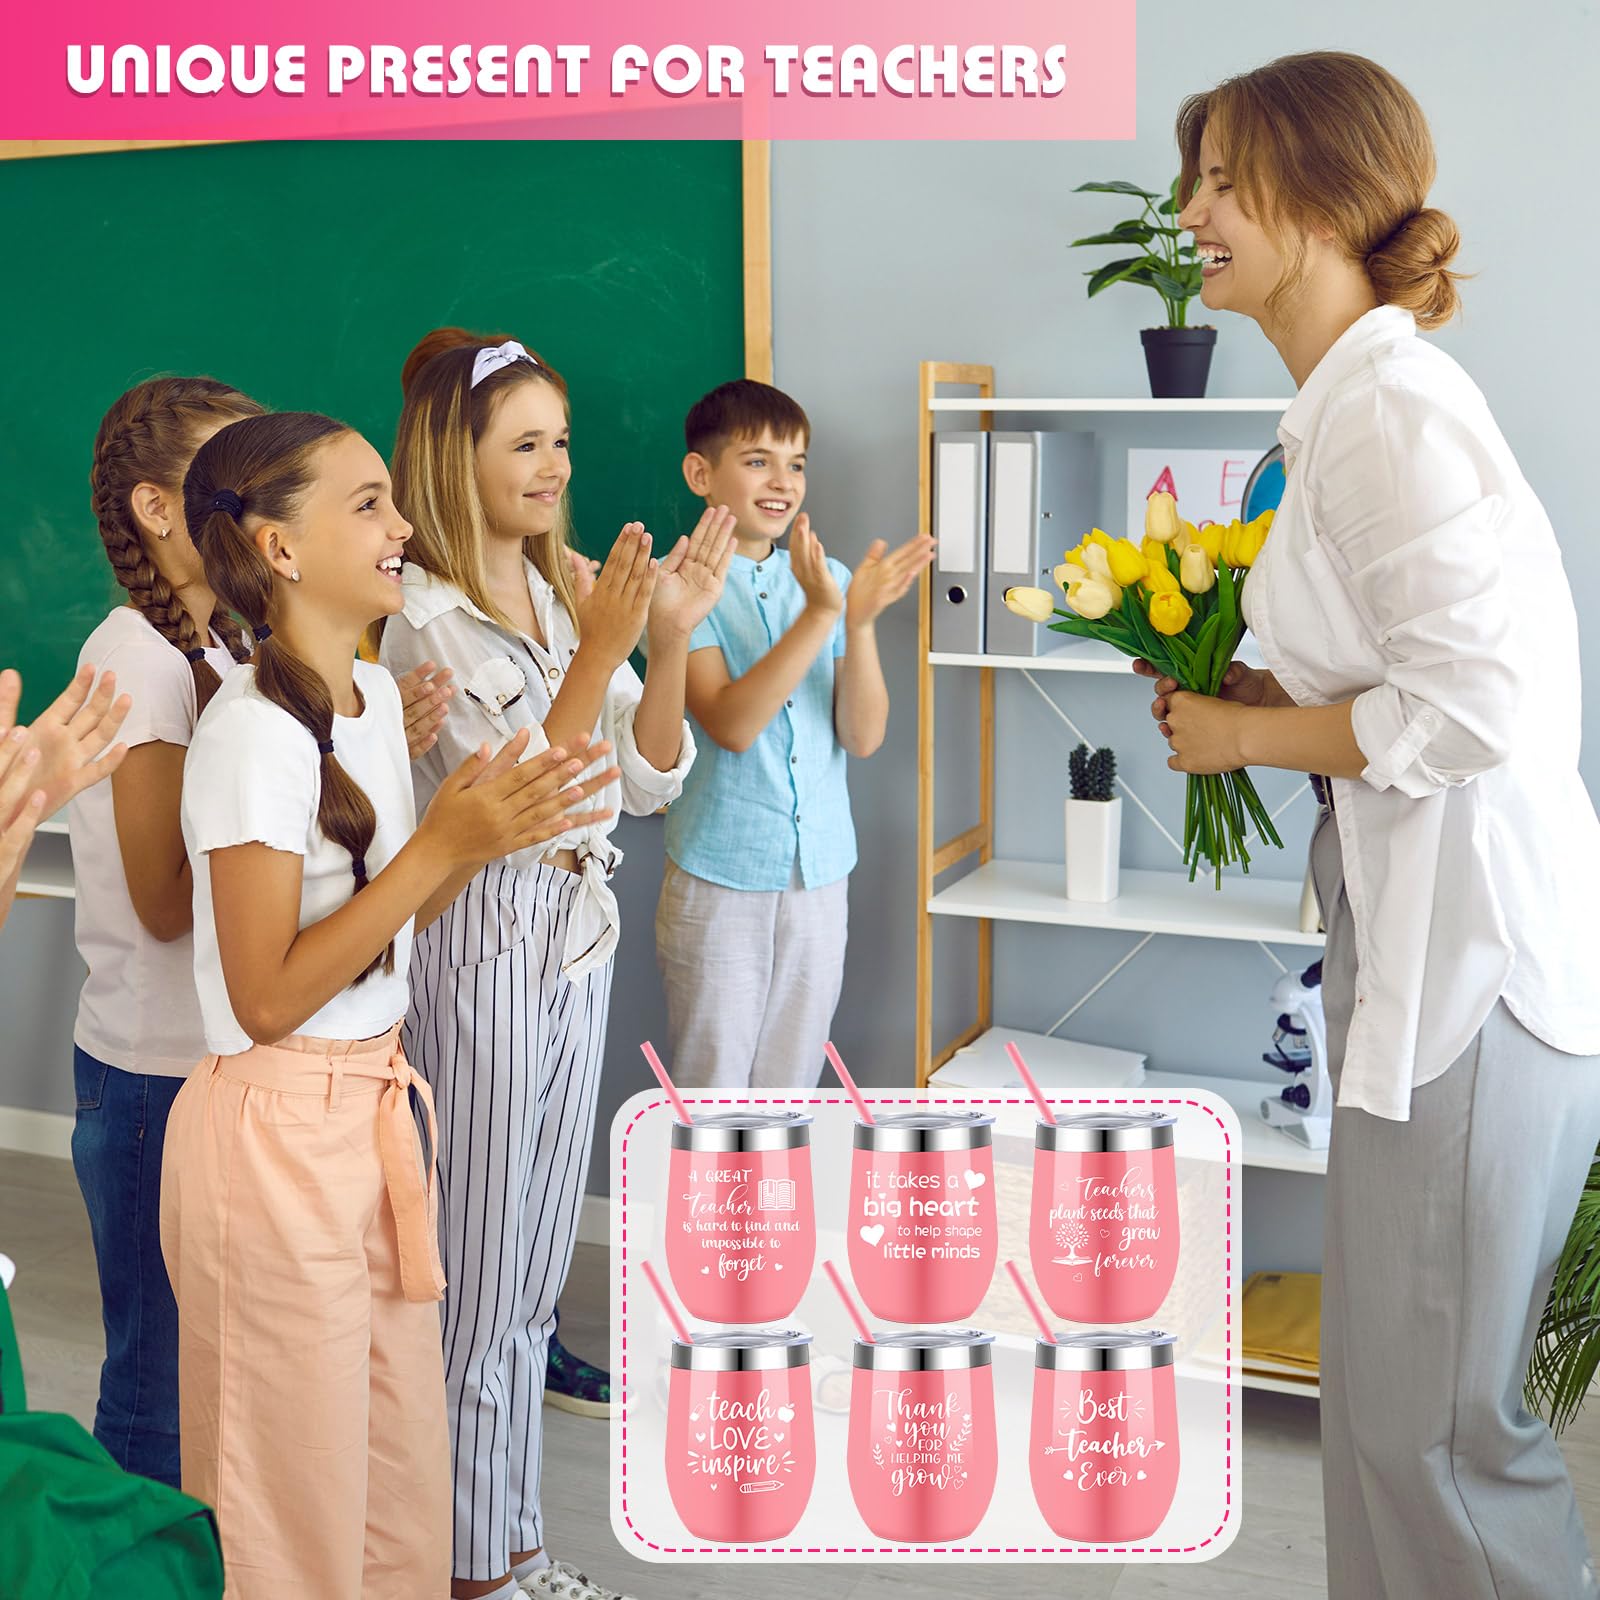 6 Pcs Christmas Teacher Appreciation Gifts Thank You Teacher Gifts for Women Stainless Steel Teacher Tumbler with Straw and Lid 12 oz Insulated Teacher Mug Birthday Gifts for Teacher(Pink)